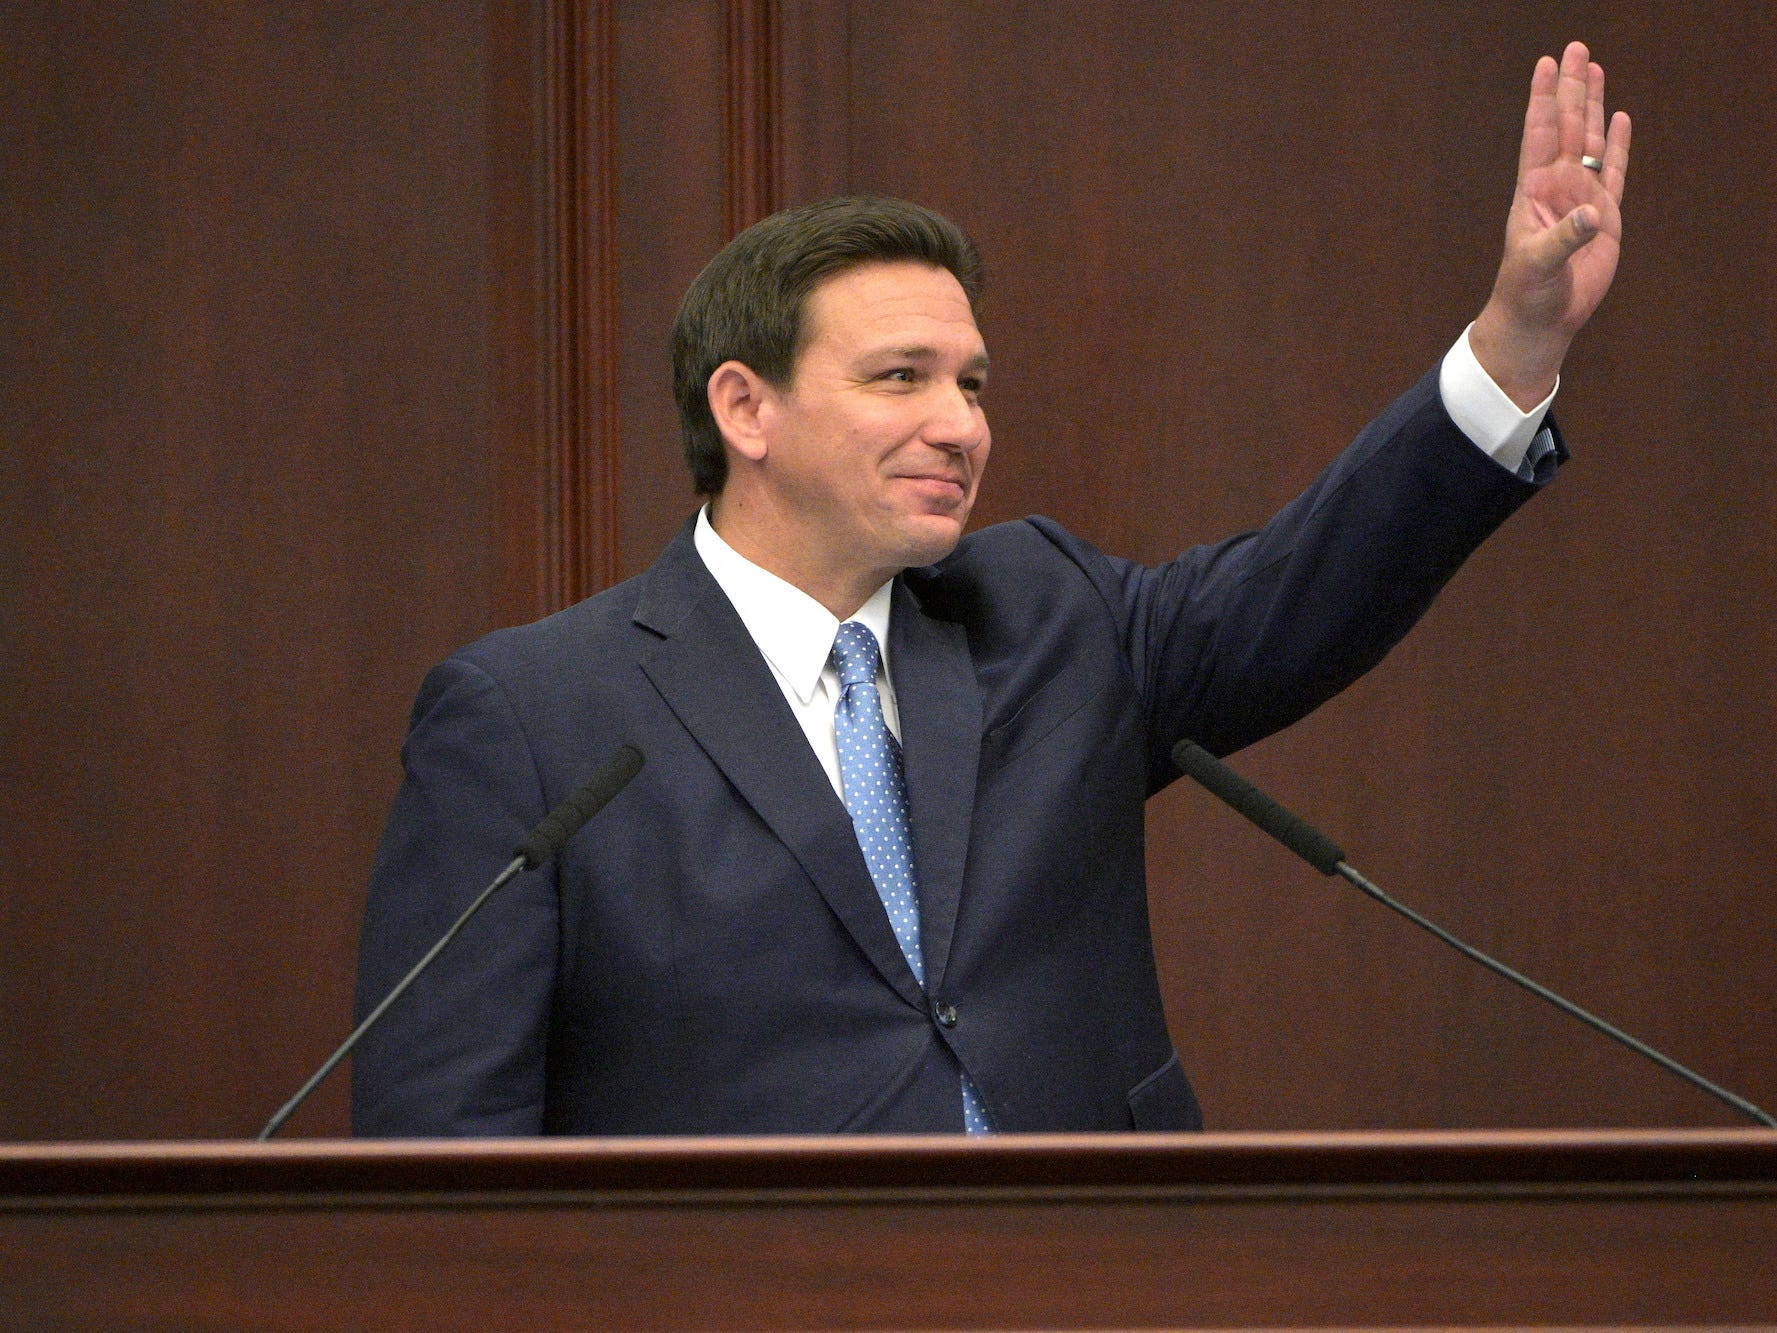 Gov. Ron DeSantis gestures during his annual address to state lawmakers in the Florida capitol of Tallahassee.